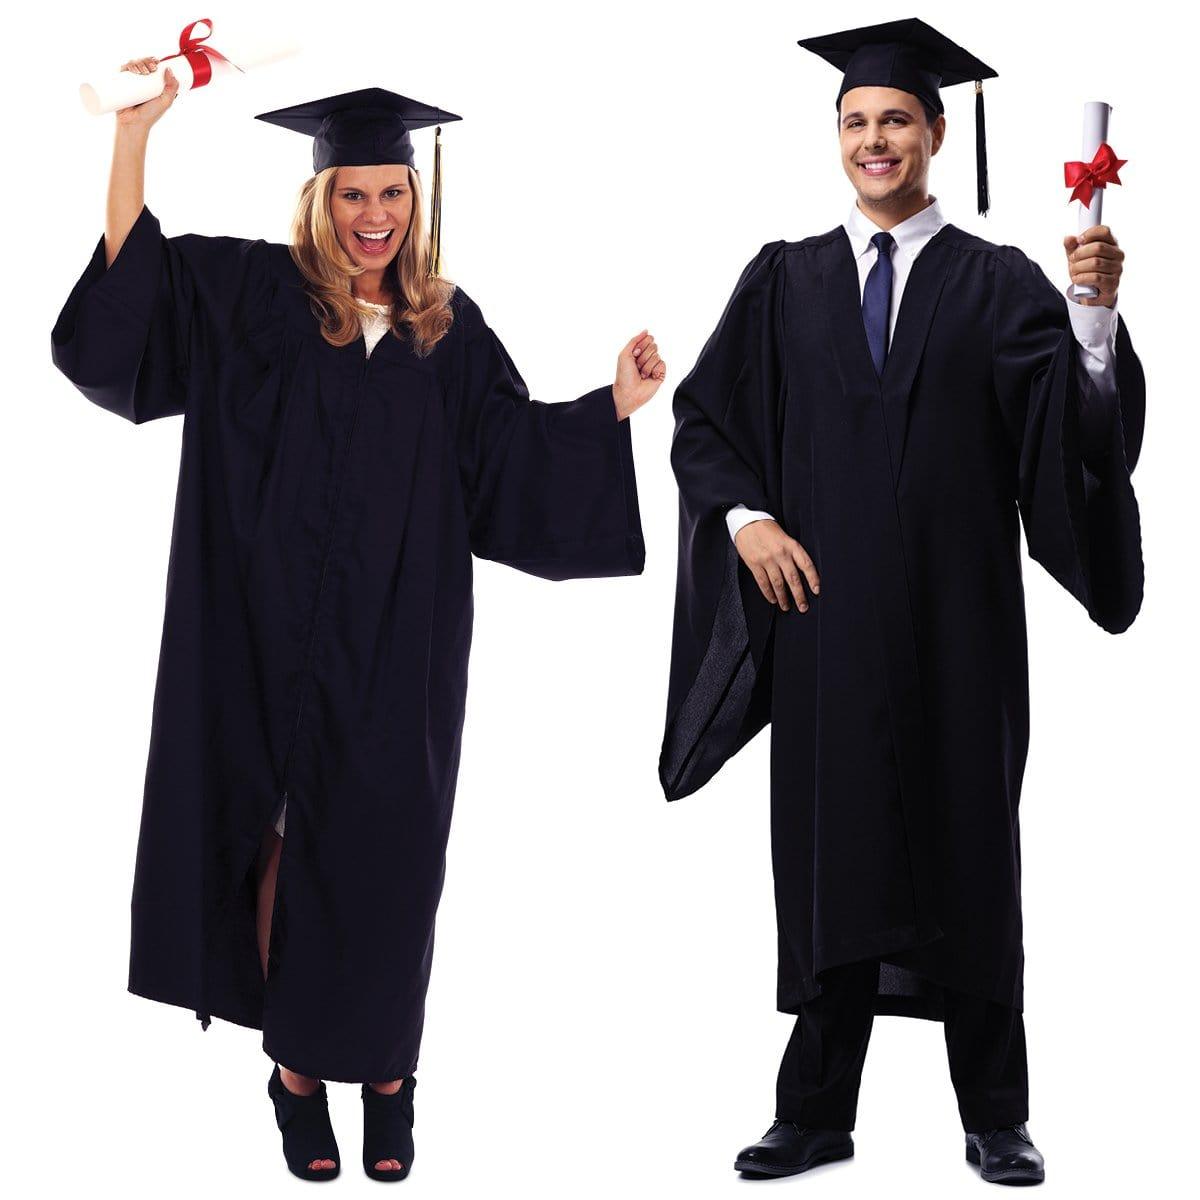 Buy Graduation Black graduation gown with hat for adults sold at Party Expert